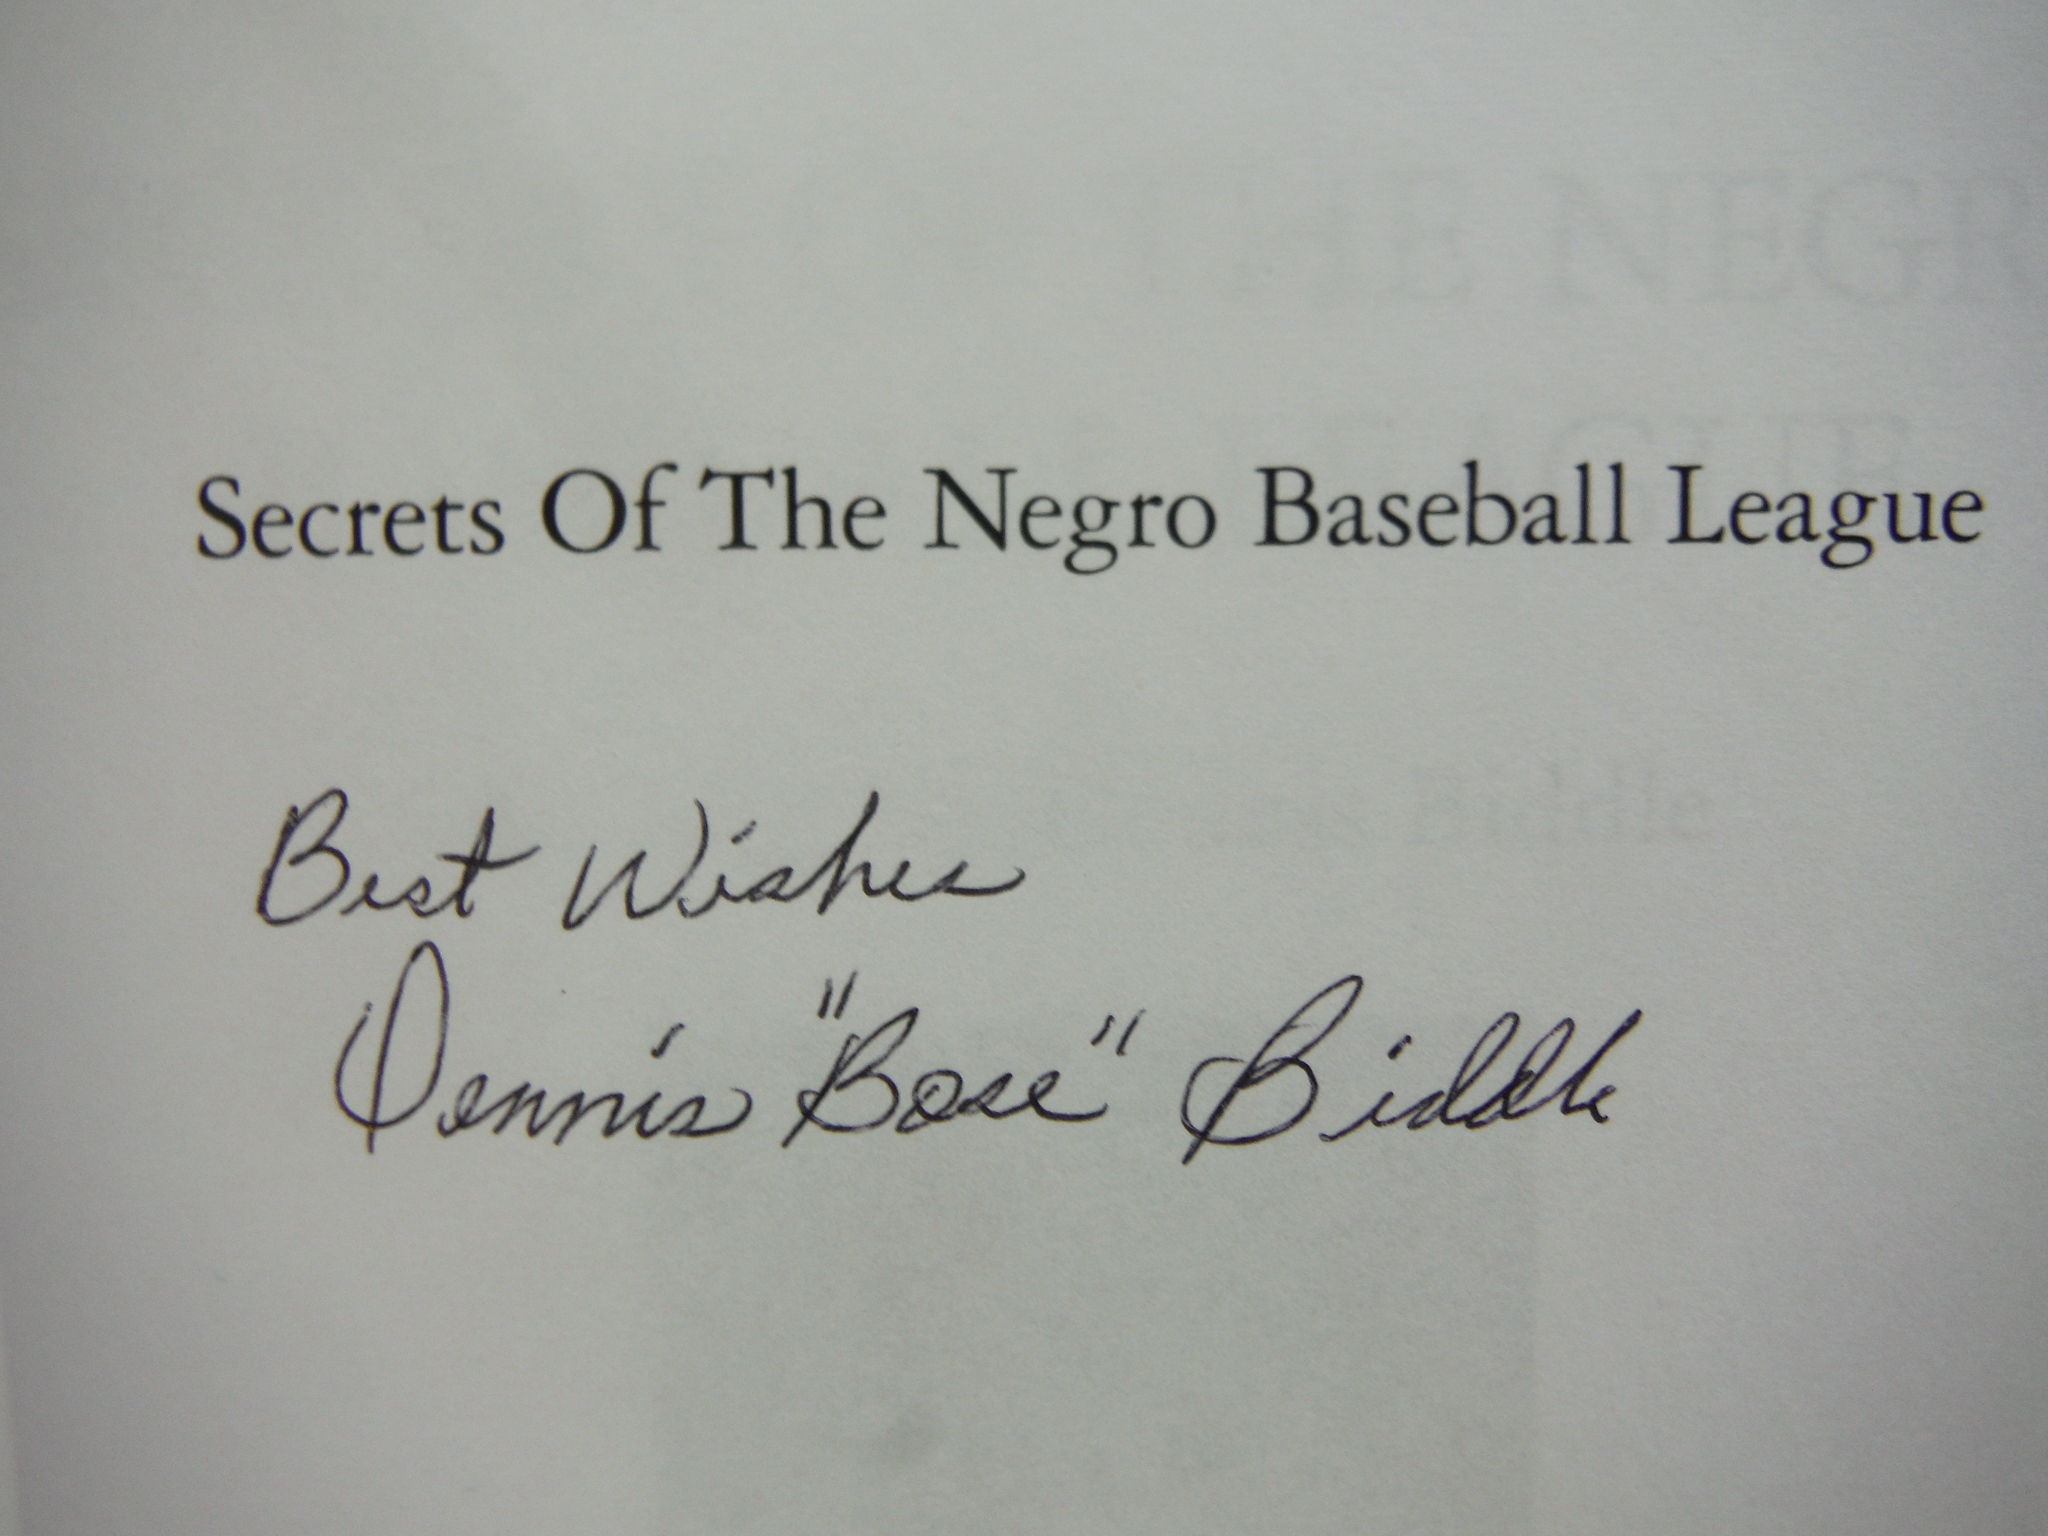 Image 1 of Secrets of the Negro Baseball League: As Told By Dennis Biddle